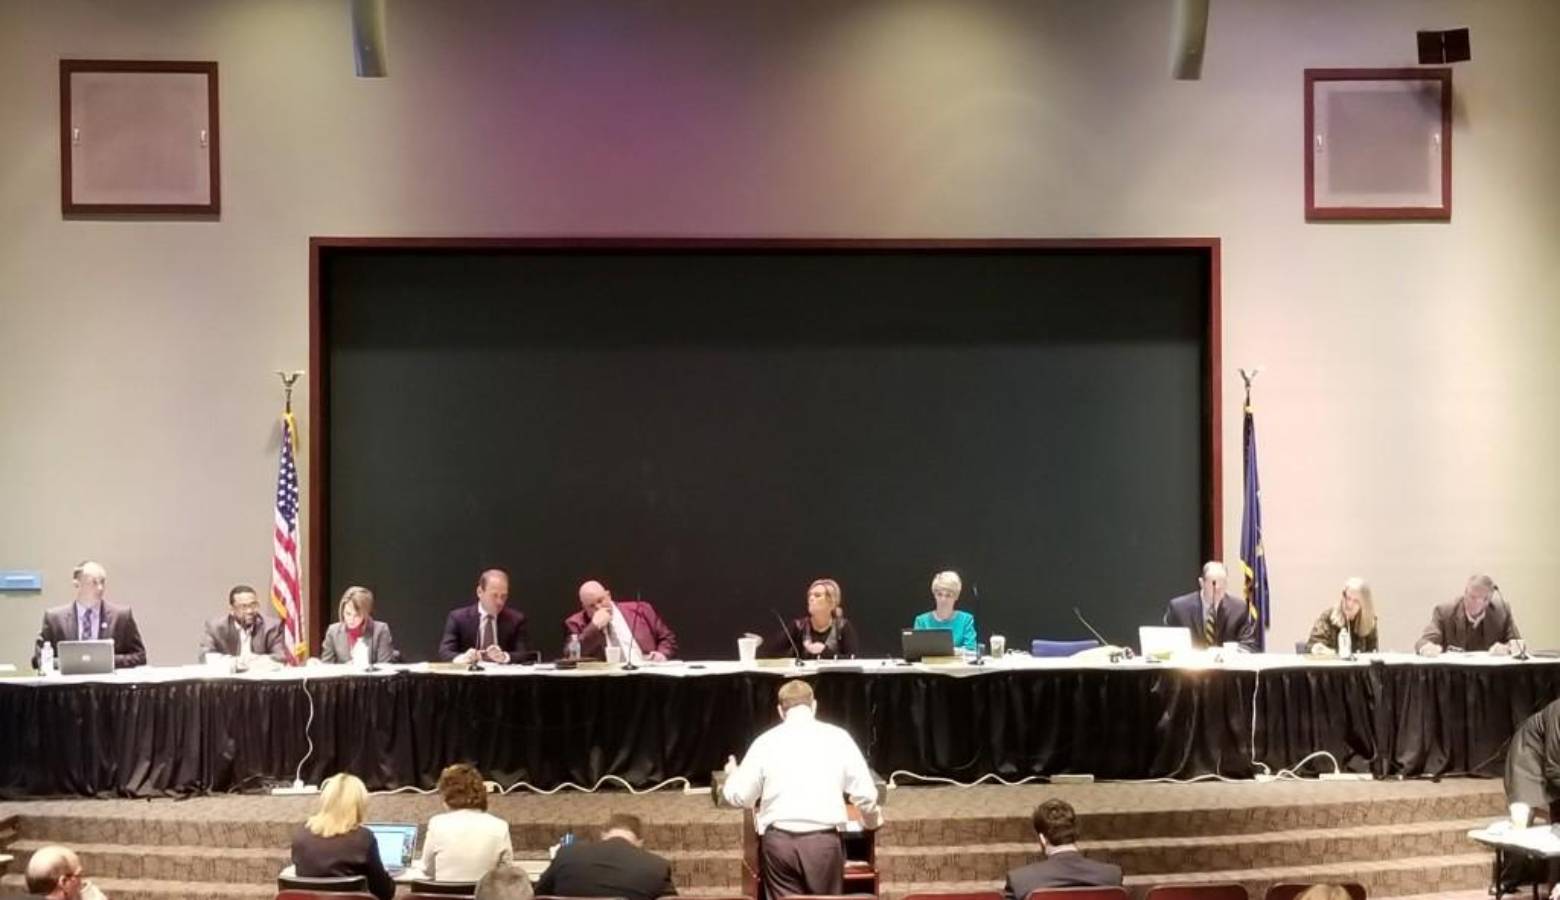 The State Board of Education has discussed how to make changes to Indiana’s school accountability system after the state’s ESSA plan received federal approval early this year. (Jeanie Lindsay/IPB News)